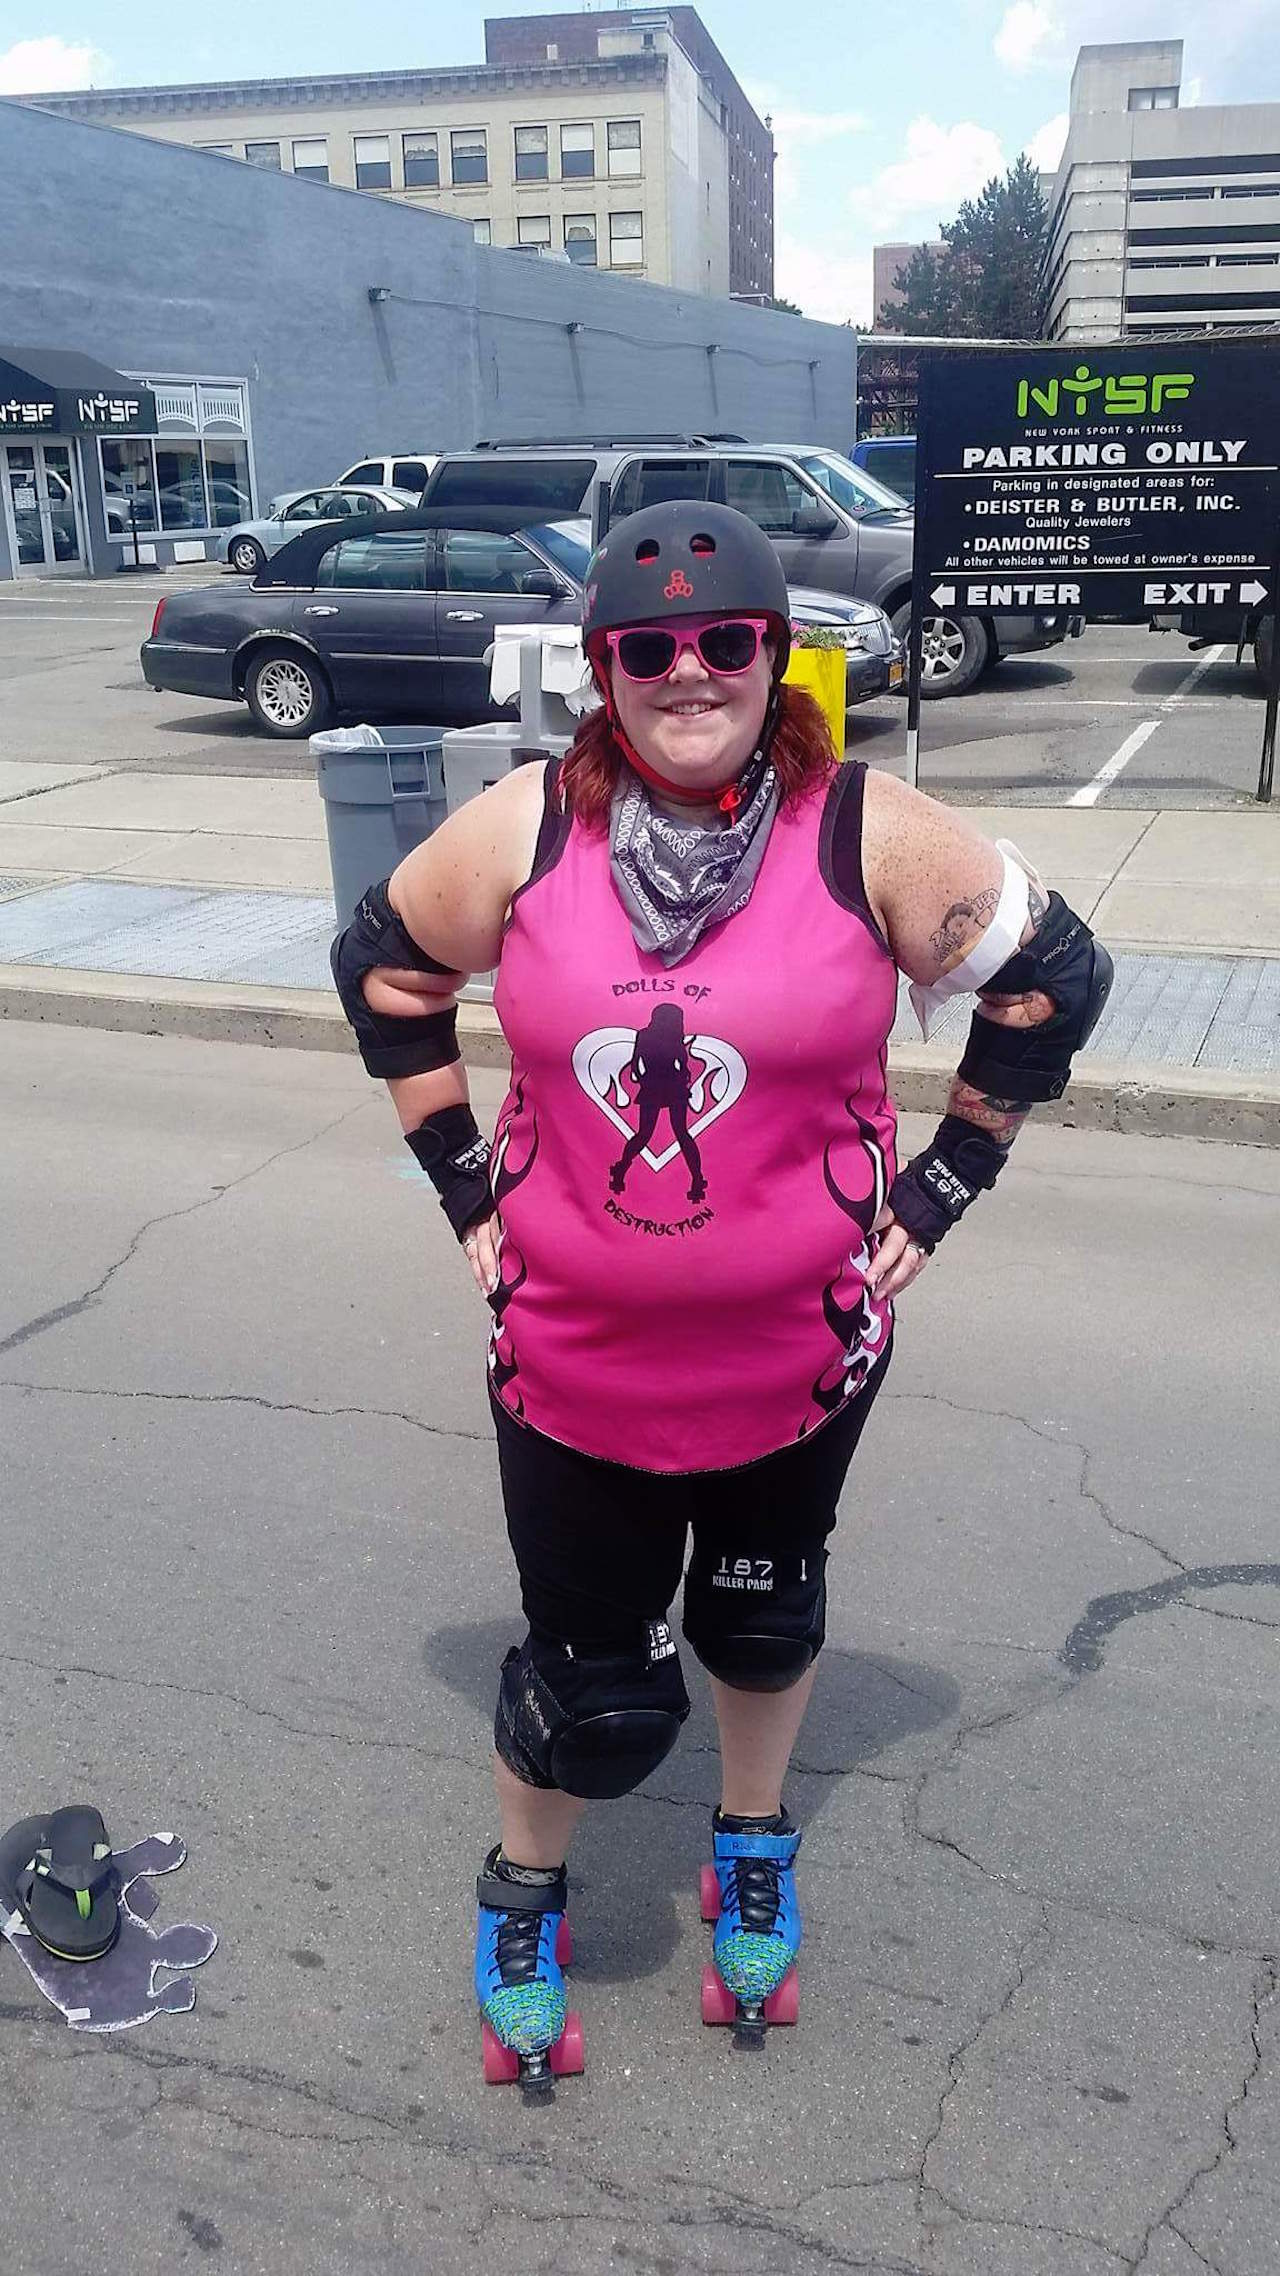 woman with roller derby gear on